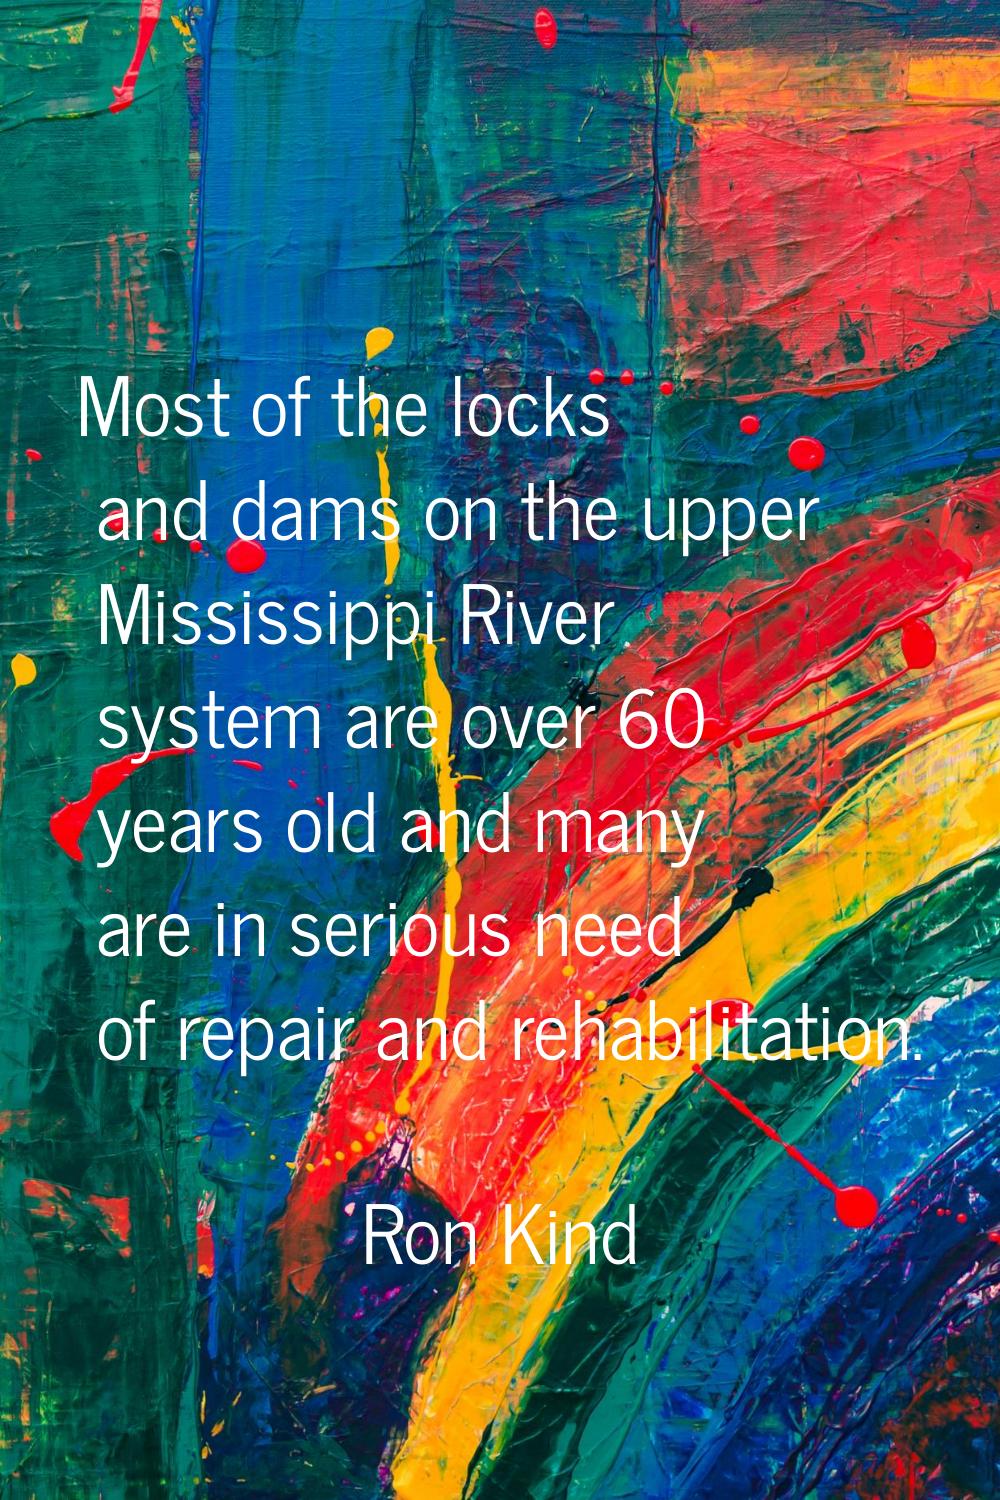 Most of the locks and dams on the upper Mississippi River system are over 60 years old and many are